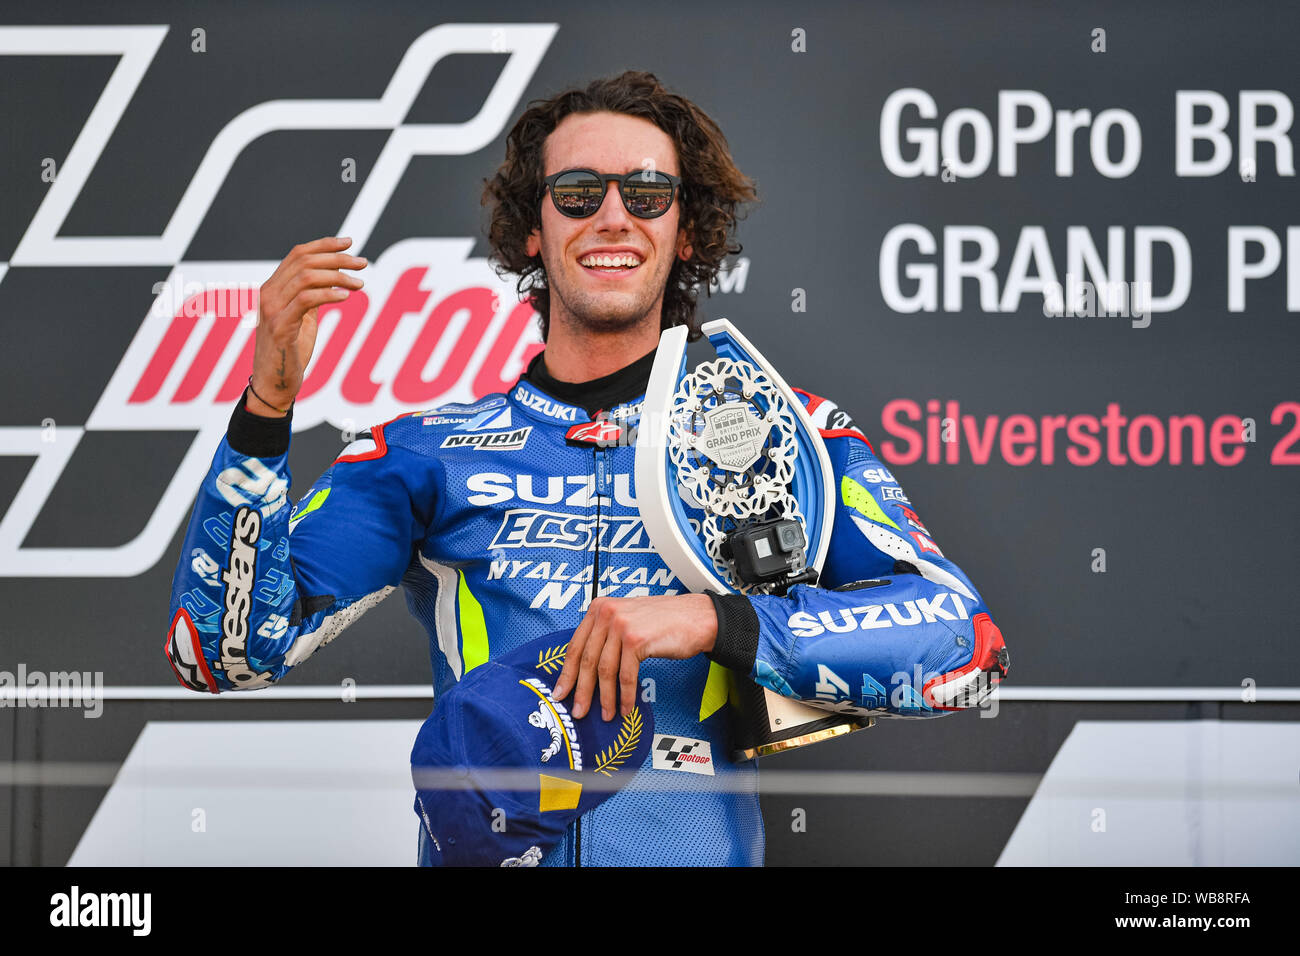 Towcester, UK. 25th Aug, 2019. Alex Rins (SPA) of Team SUZUKI ECSTAR celebrates winning the Sunday Race at presentation after the Sunday’s Race of  GoPro British Grand Prix at Silverstone Circuit on Sunday, August 25, 2019 in TOWCESTER, ENGLAND. Credit: Taka G Wu/Alamy Live News Stock Photo